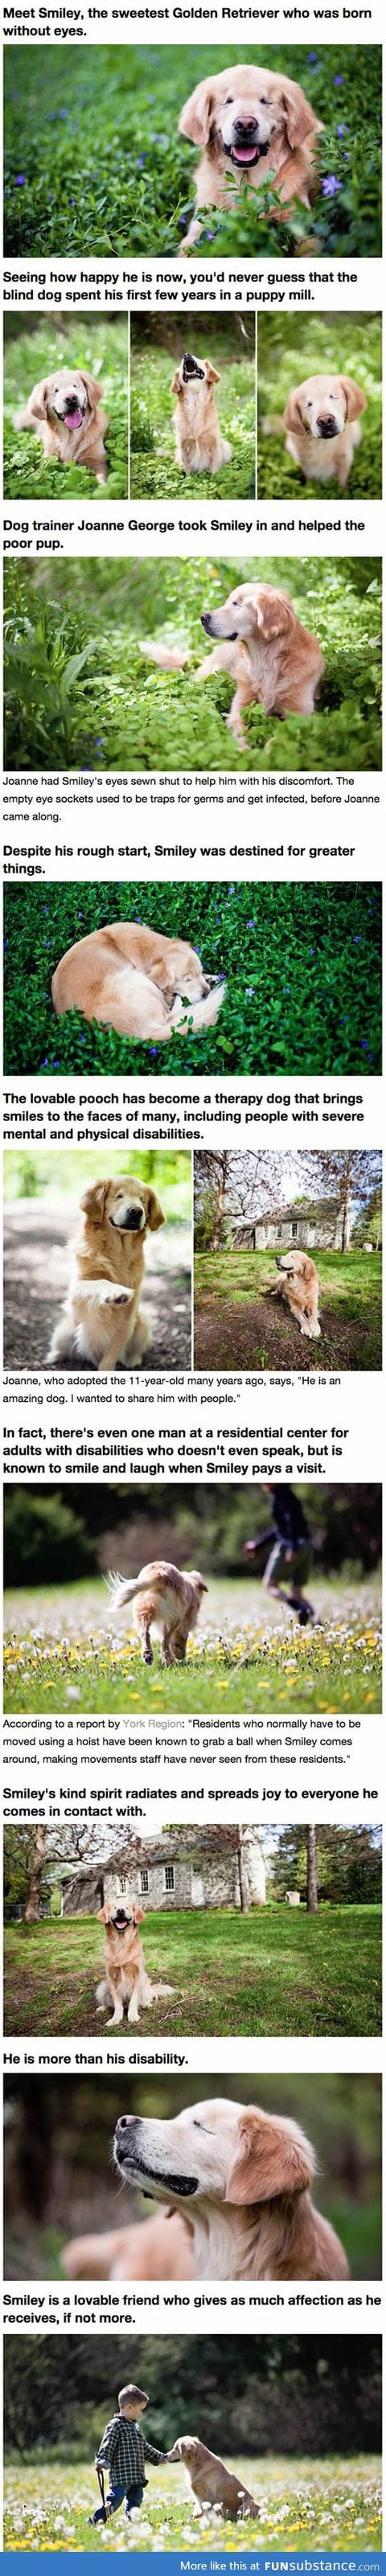 Golden retriever born without eyes brings joy to humans with disabilities